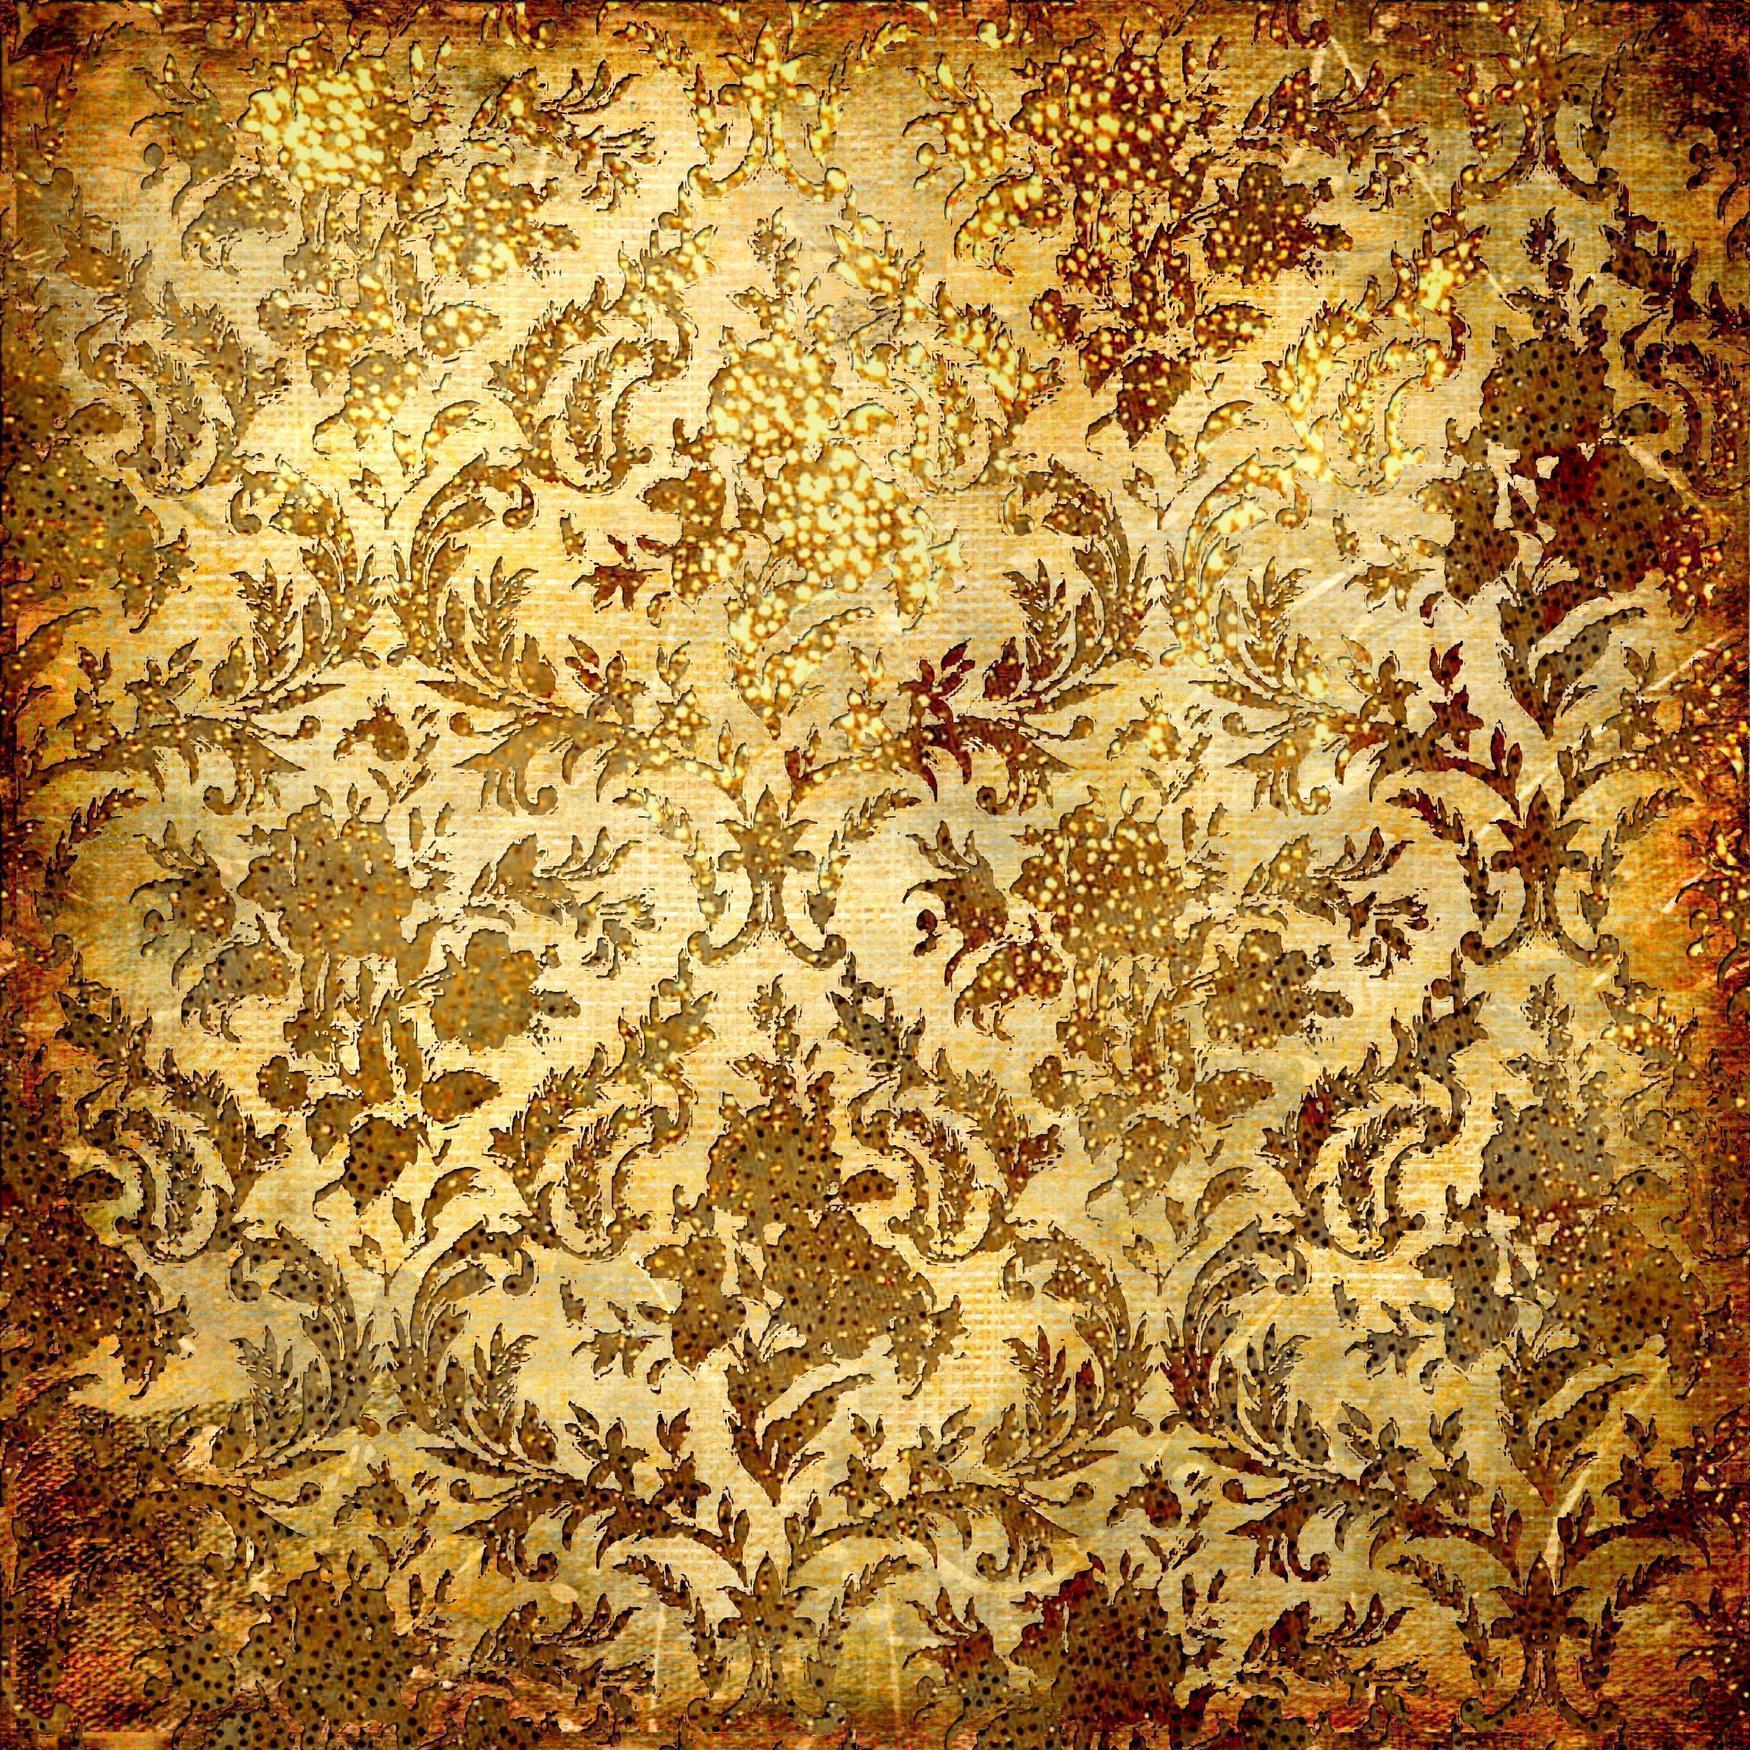 1750 x 1750 · jpeg - Gold Backgrounds Image - Wallpaper Cave